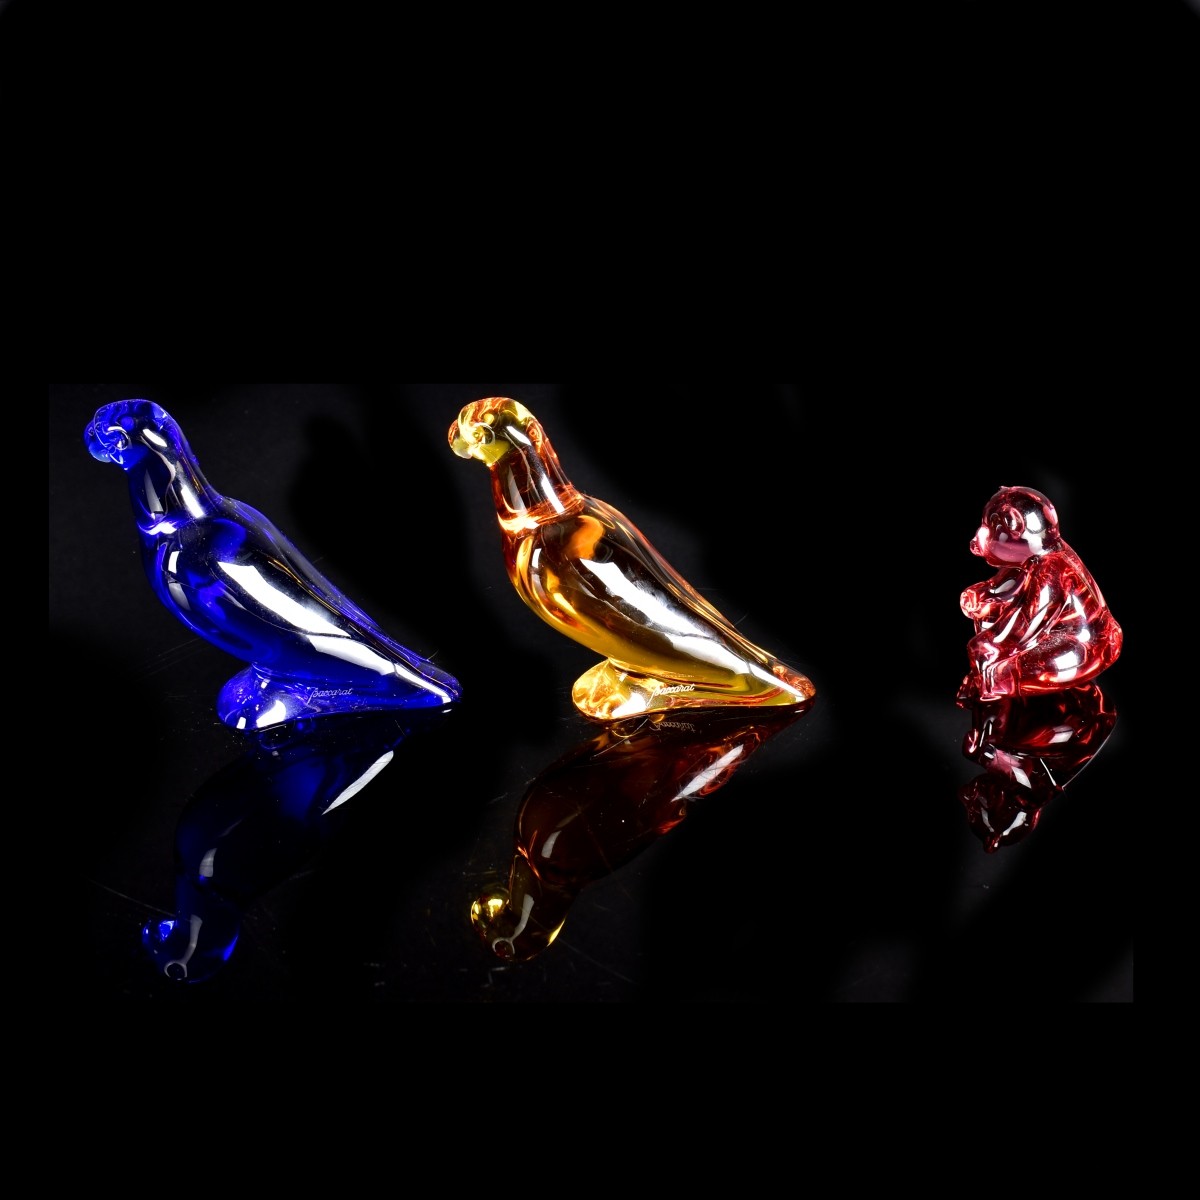 Three Baccarat Figurines / Paperweights